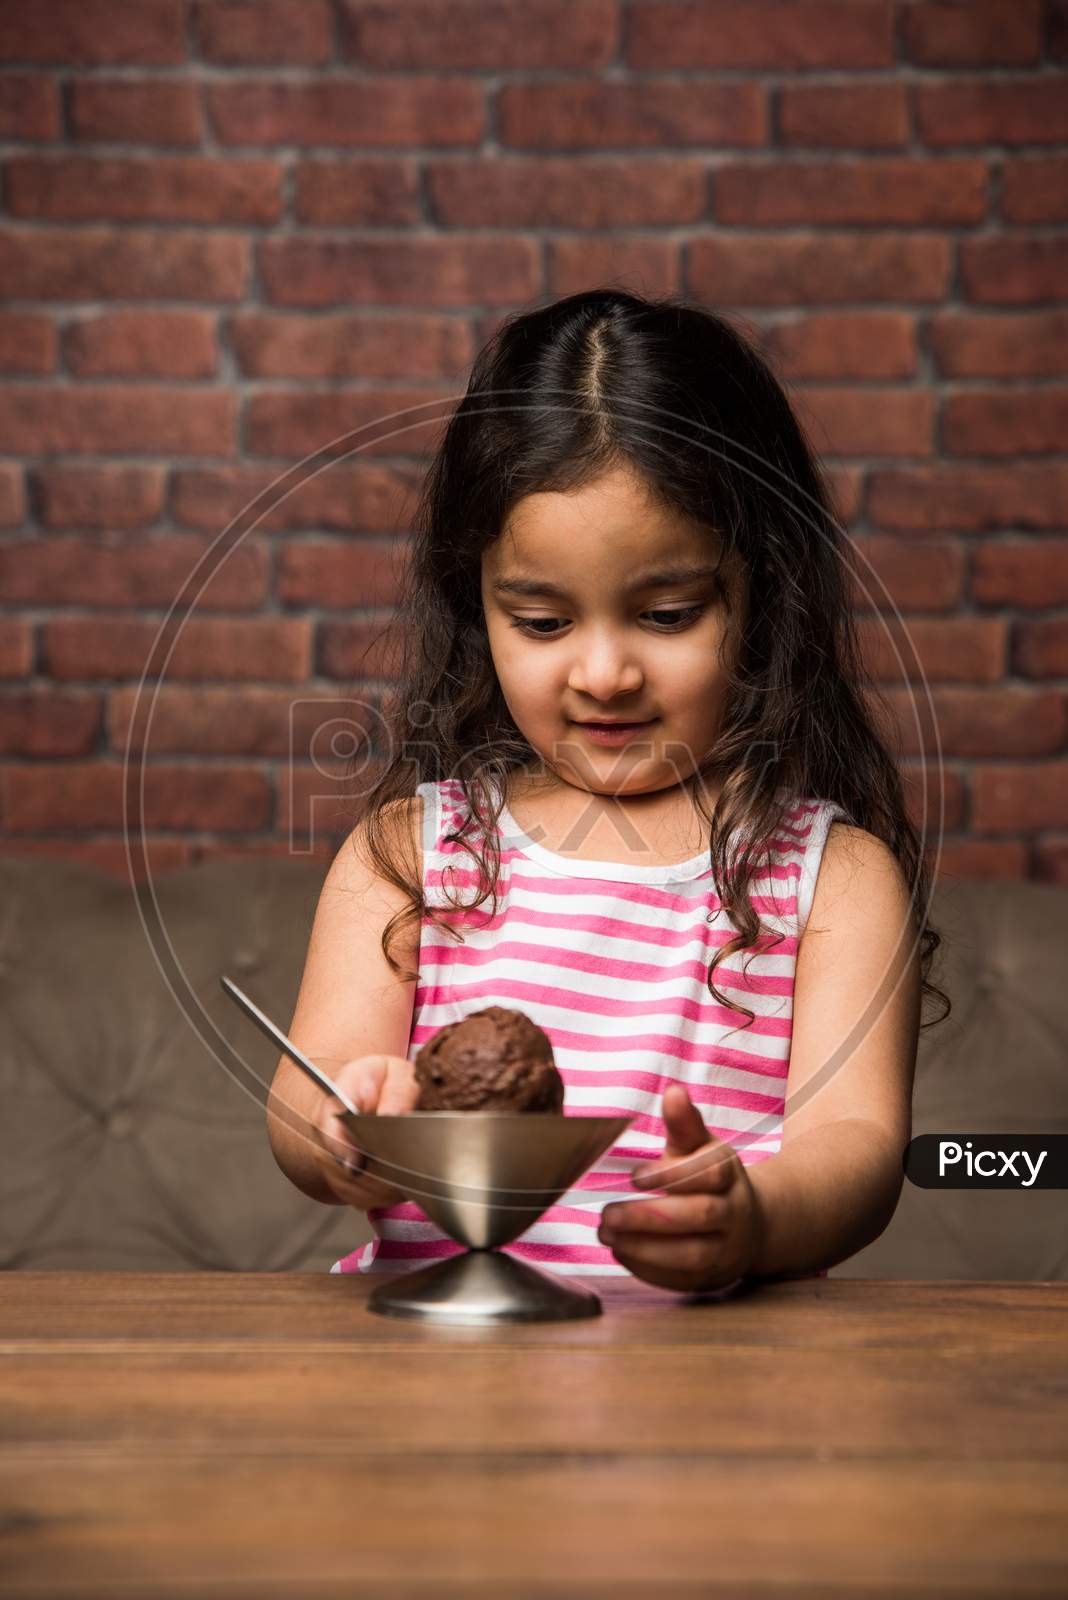 Indian Small girl eating Ice Cream in a bowl